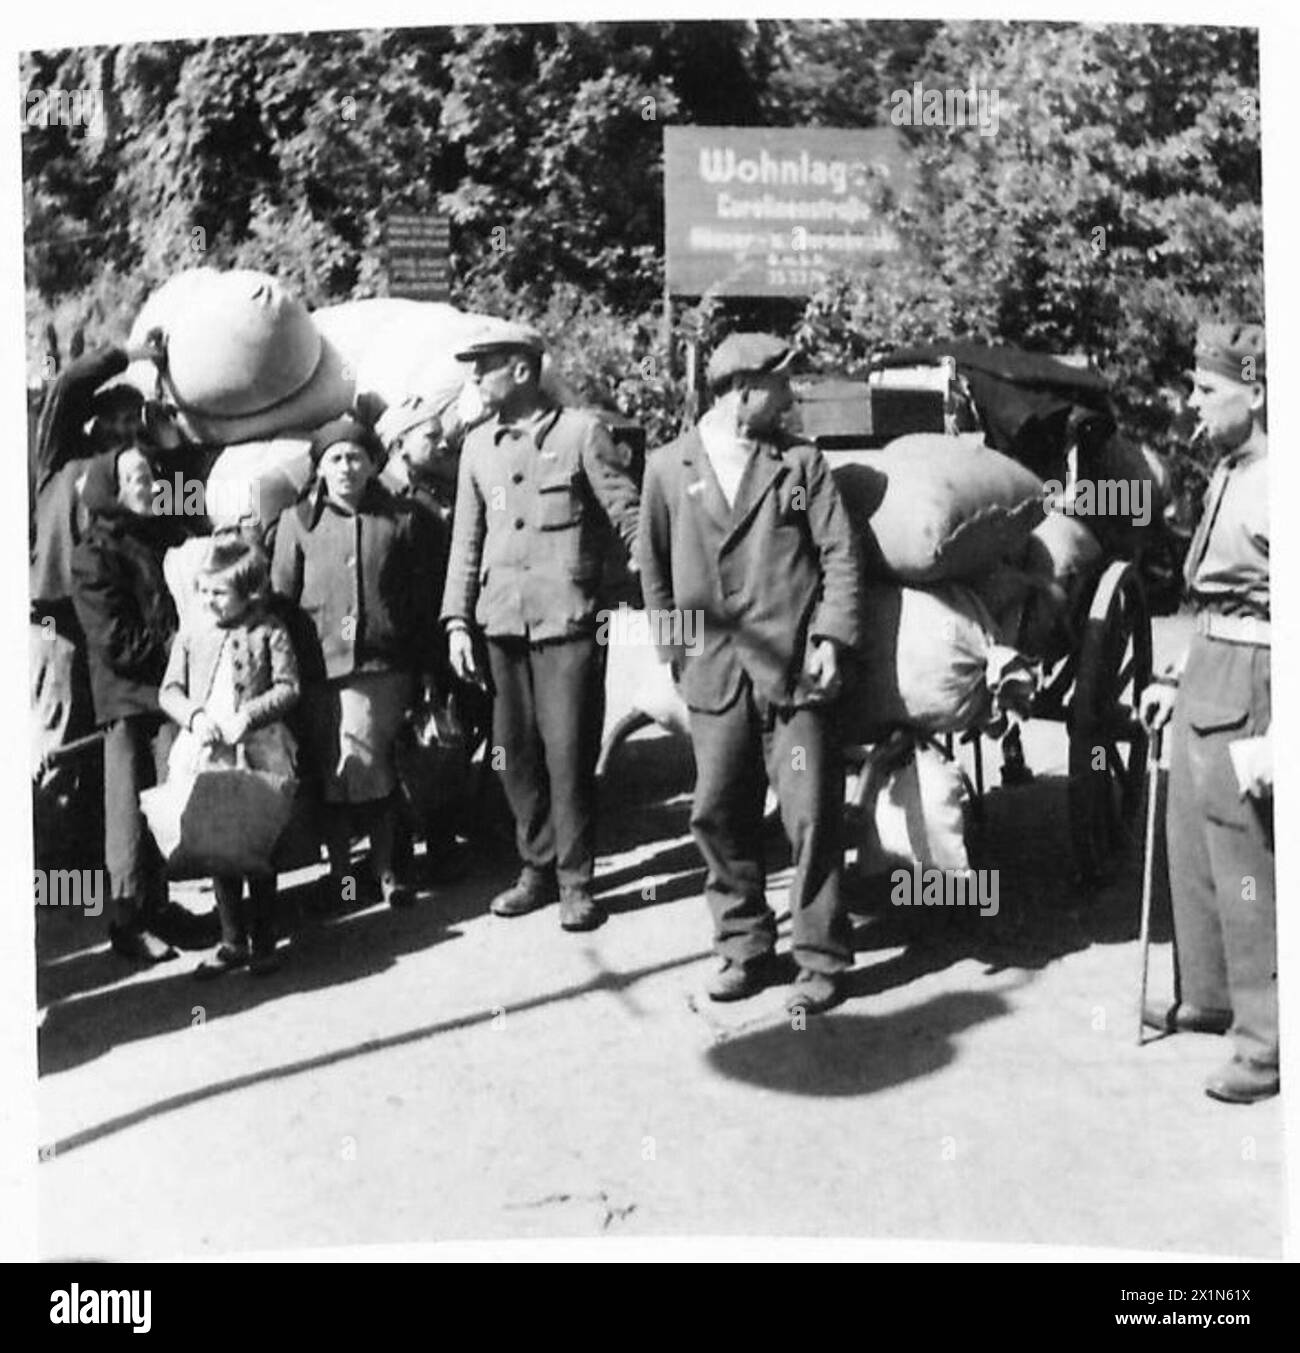 DISPLACED PERSONS AND REFUGEES IN GERMANY - Two Poles who are leaving the No.17 Displaced Persons Assembly Centre at Hamburg Zoological Gardens for a Polish national camp for repatriation, have so much luggage that they need a handcart to bring it to the lorry. The Displaced Persons camp within the grounds of Hamburg Zoo was build by the Blohm & Voss company during WWII to house the forced labourers that worked in their factory. The camp was taken over by the British on 5 May 1945 and quickly given over as an arrivals centre for displaced persons. On arrival displaced persons were organised in Stock Photo